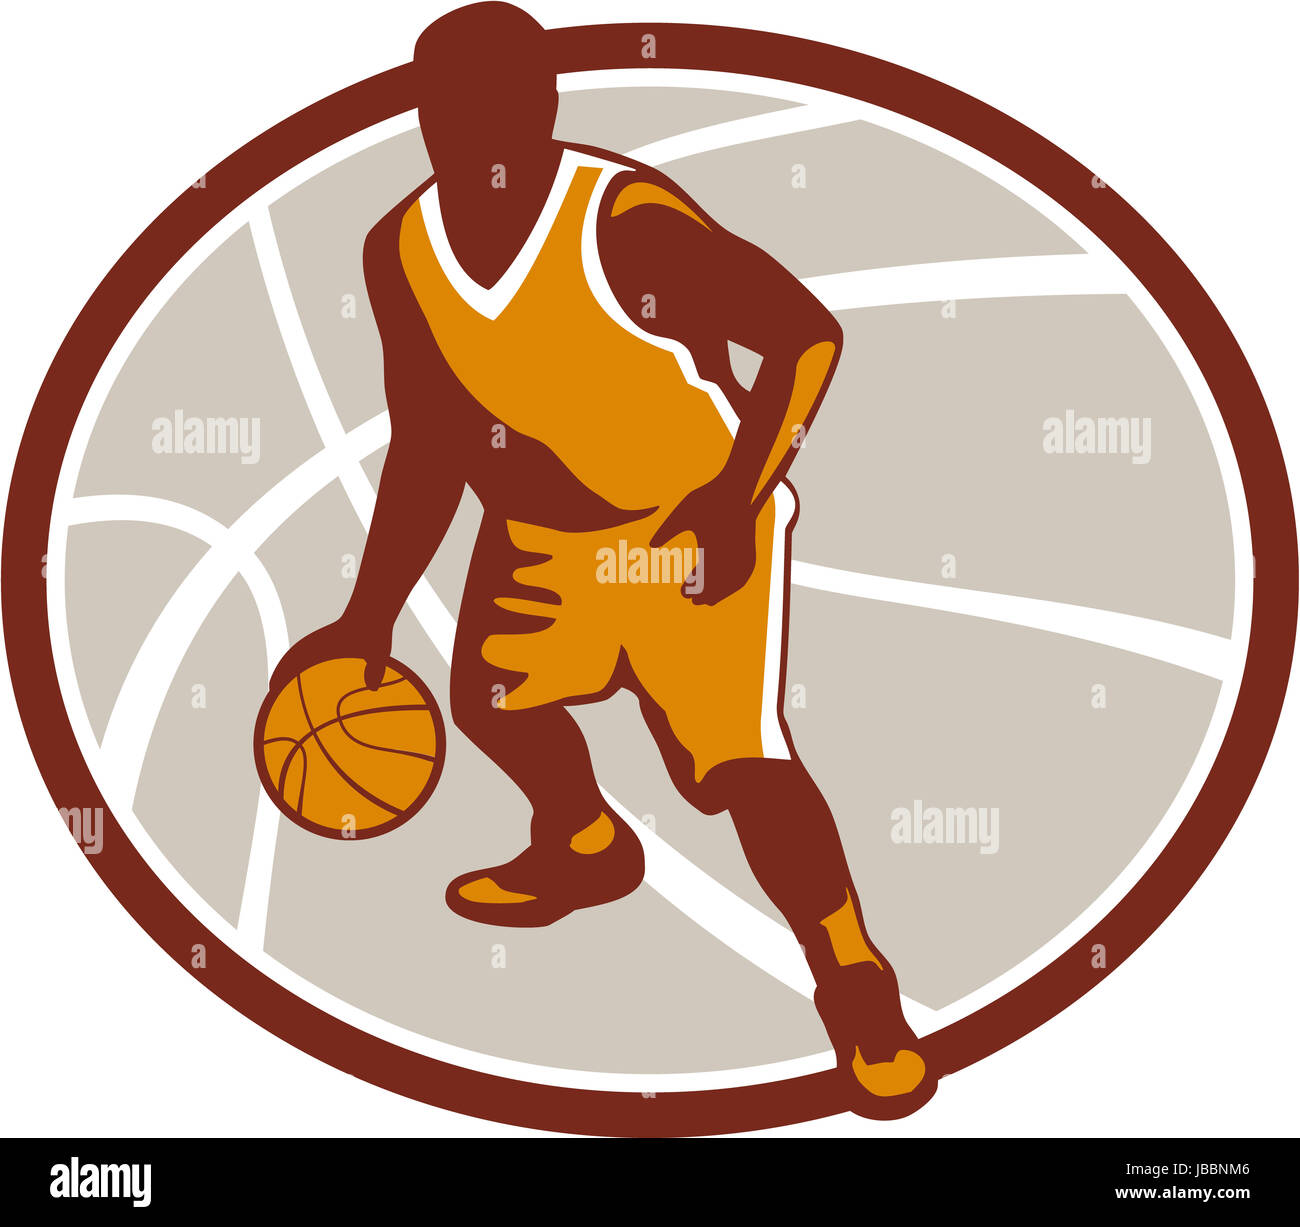 Illustration of a basketball player dribbling ball facing front set inside oval on isolated white background. Stock Photo